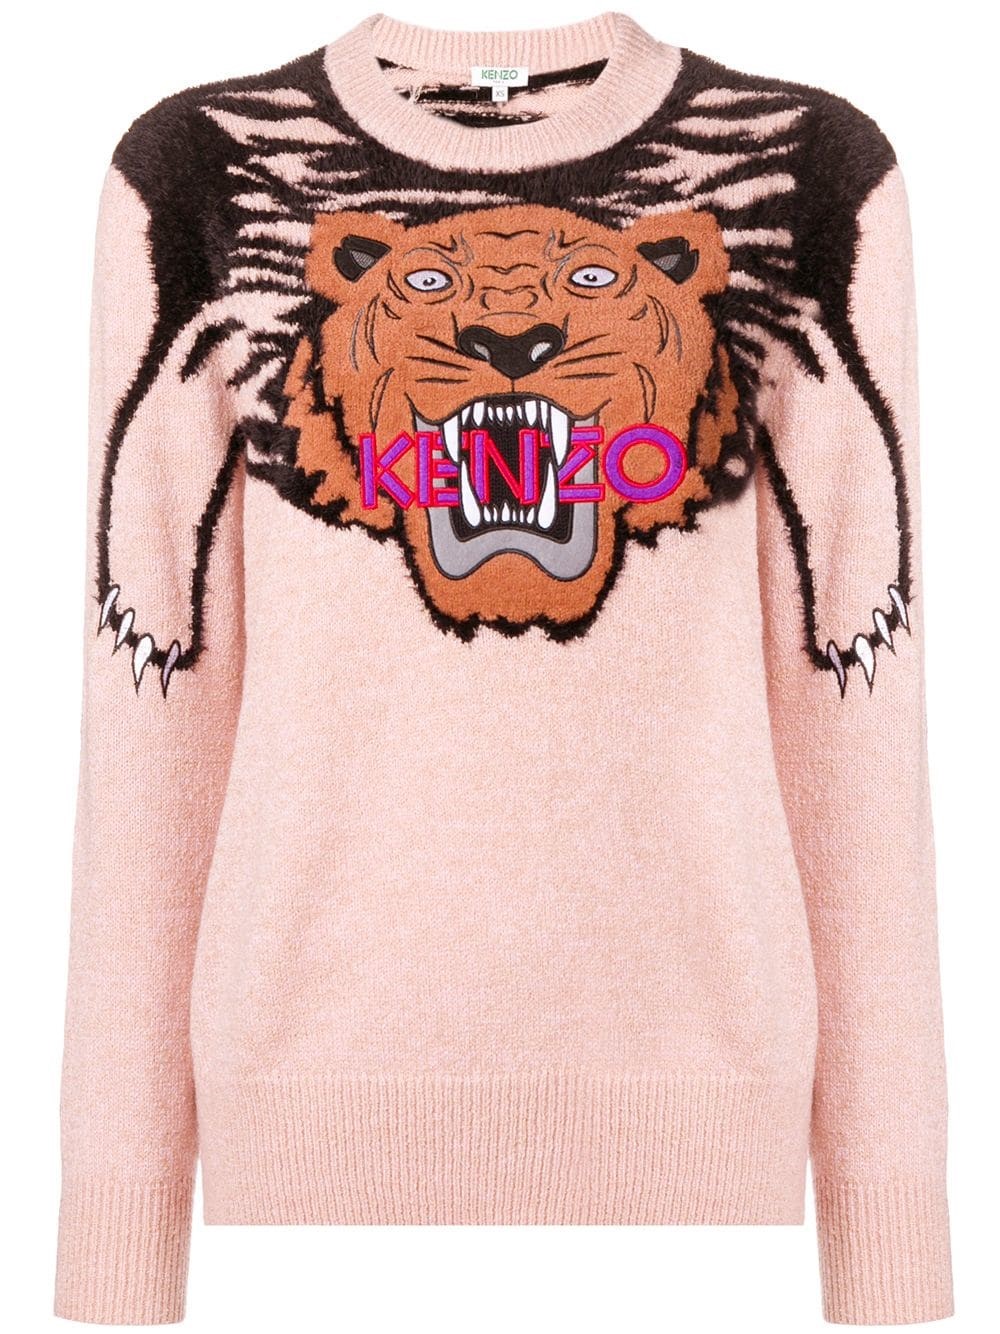 kenzo TIGER SWEATER available on montiboutique.com - 25178